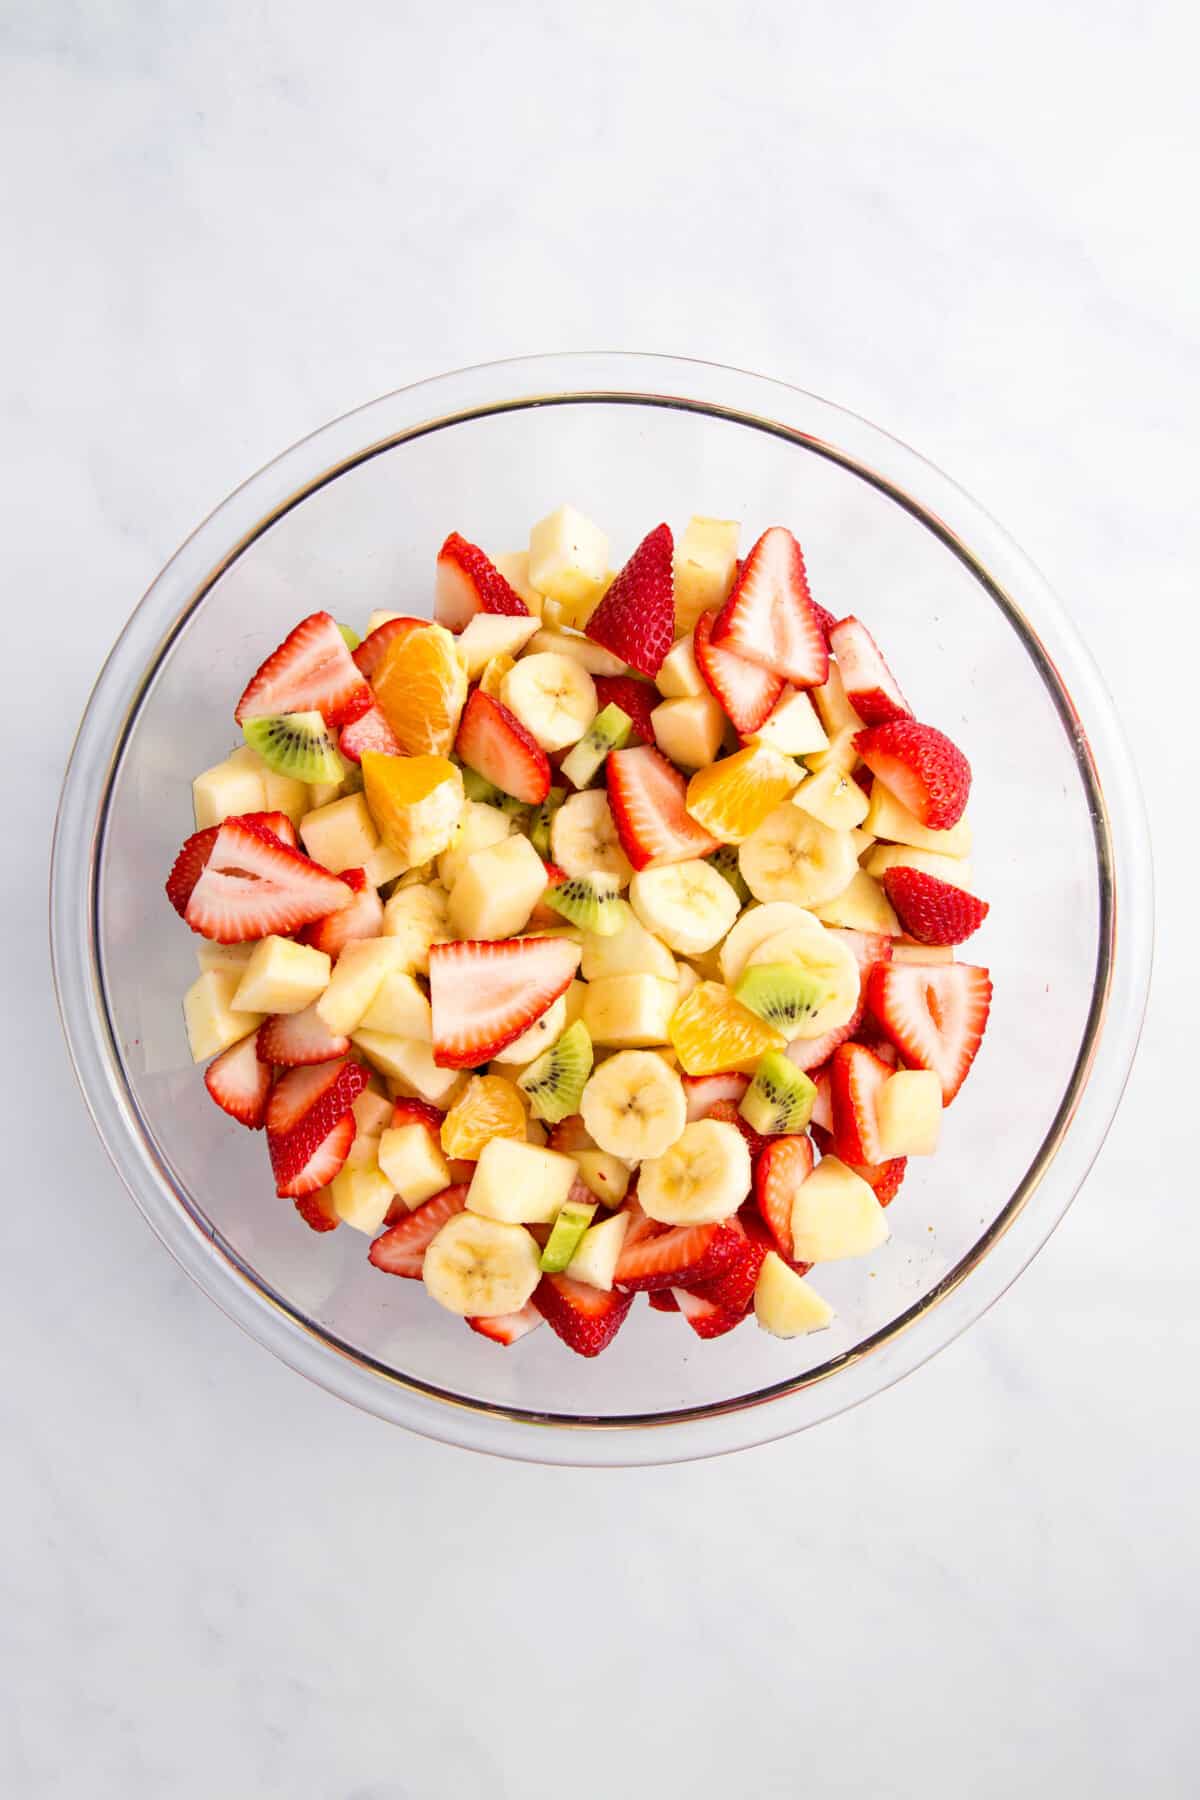 cut up strawberries, bananas, kiwi, oranges in a large glass bowl.